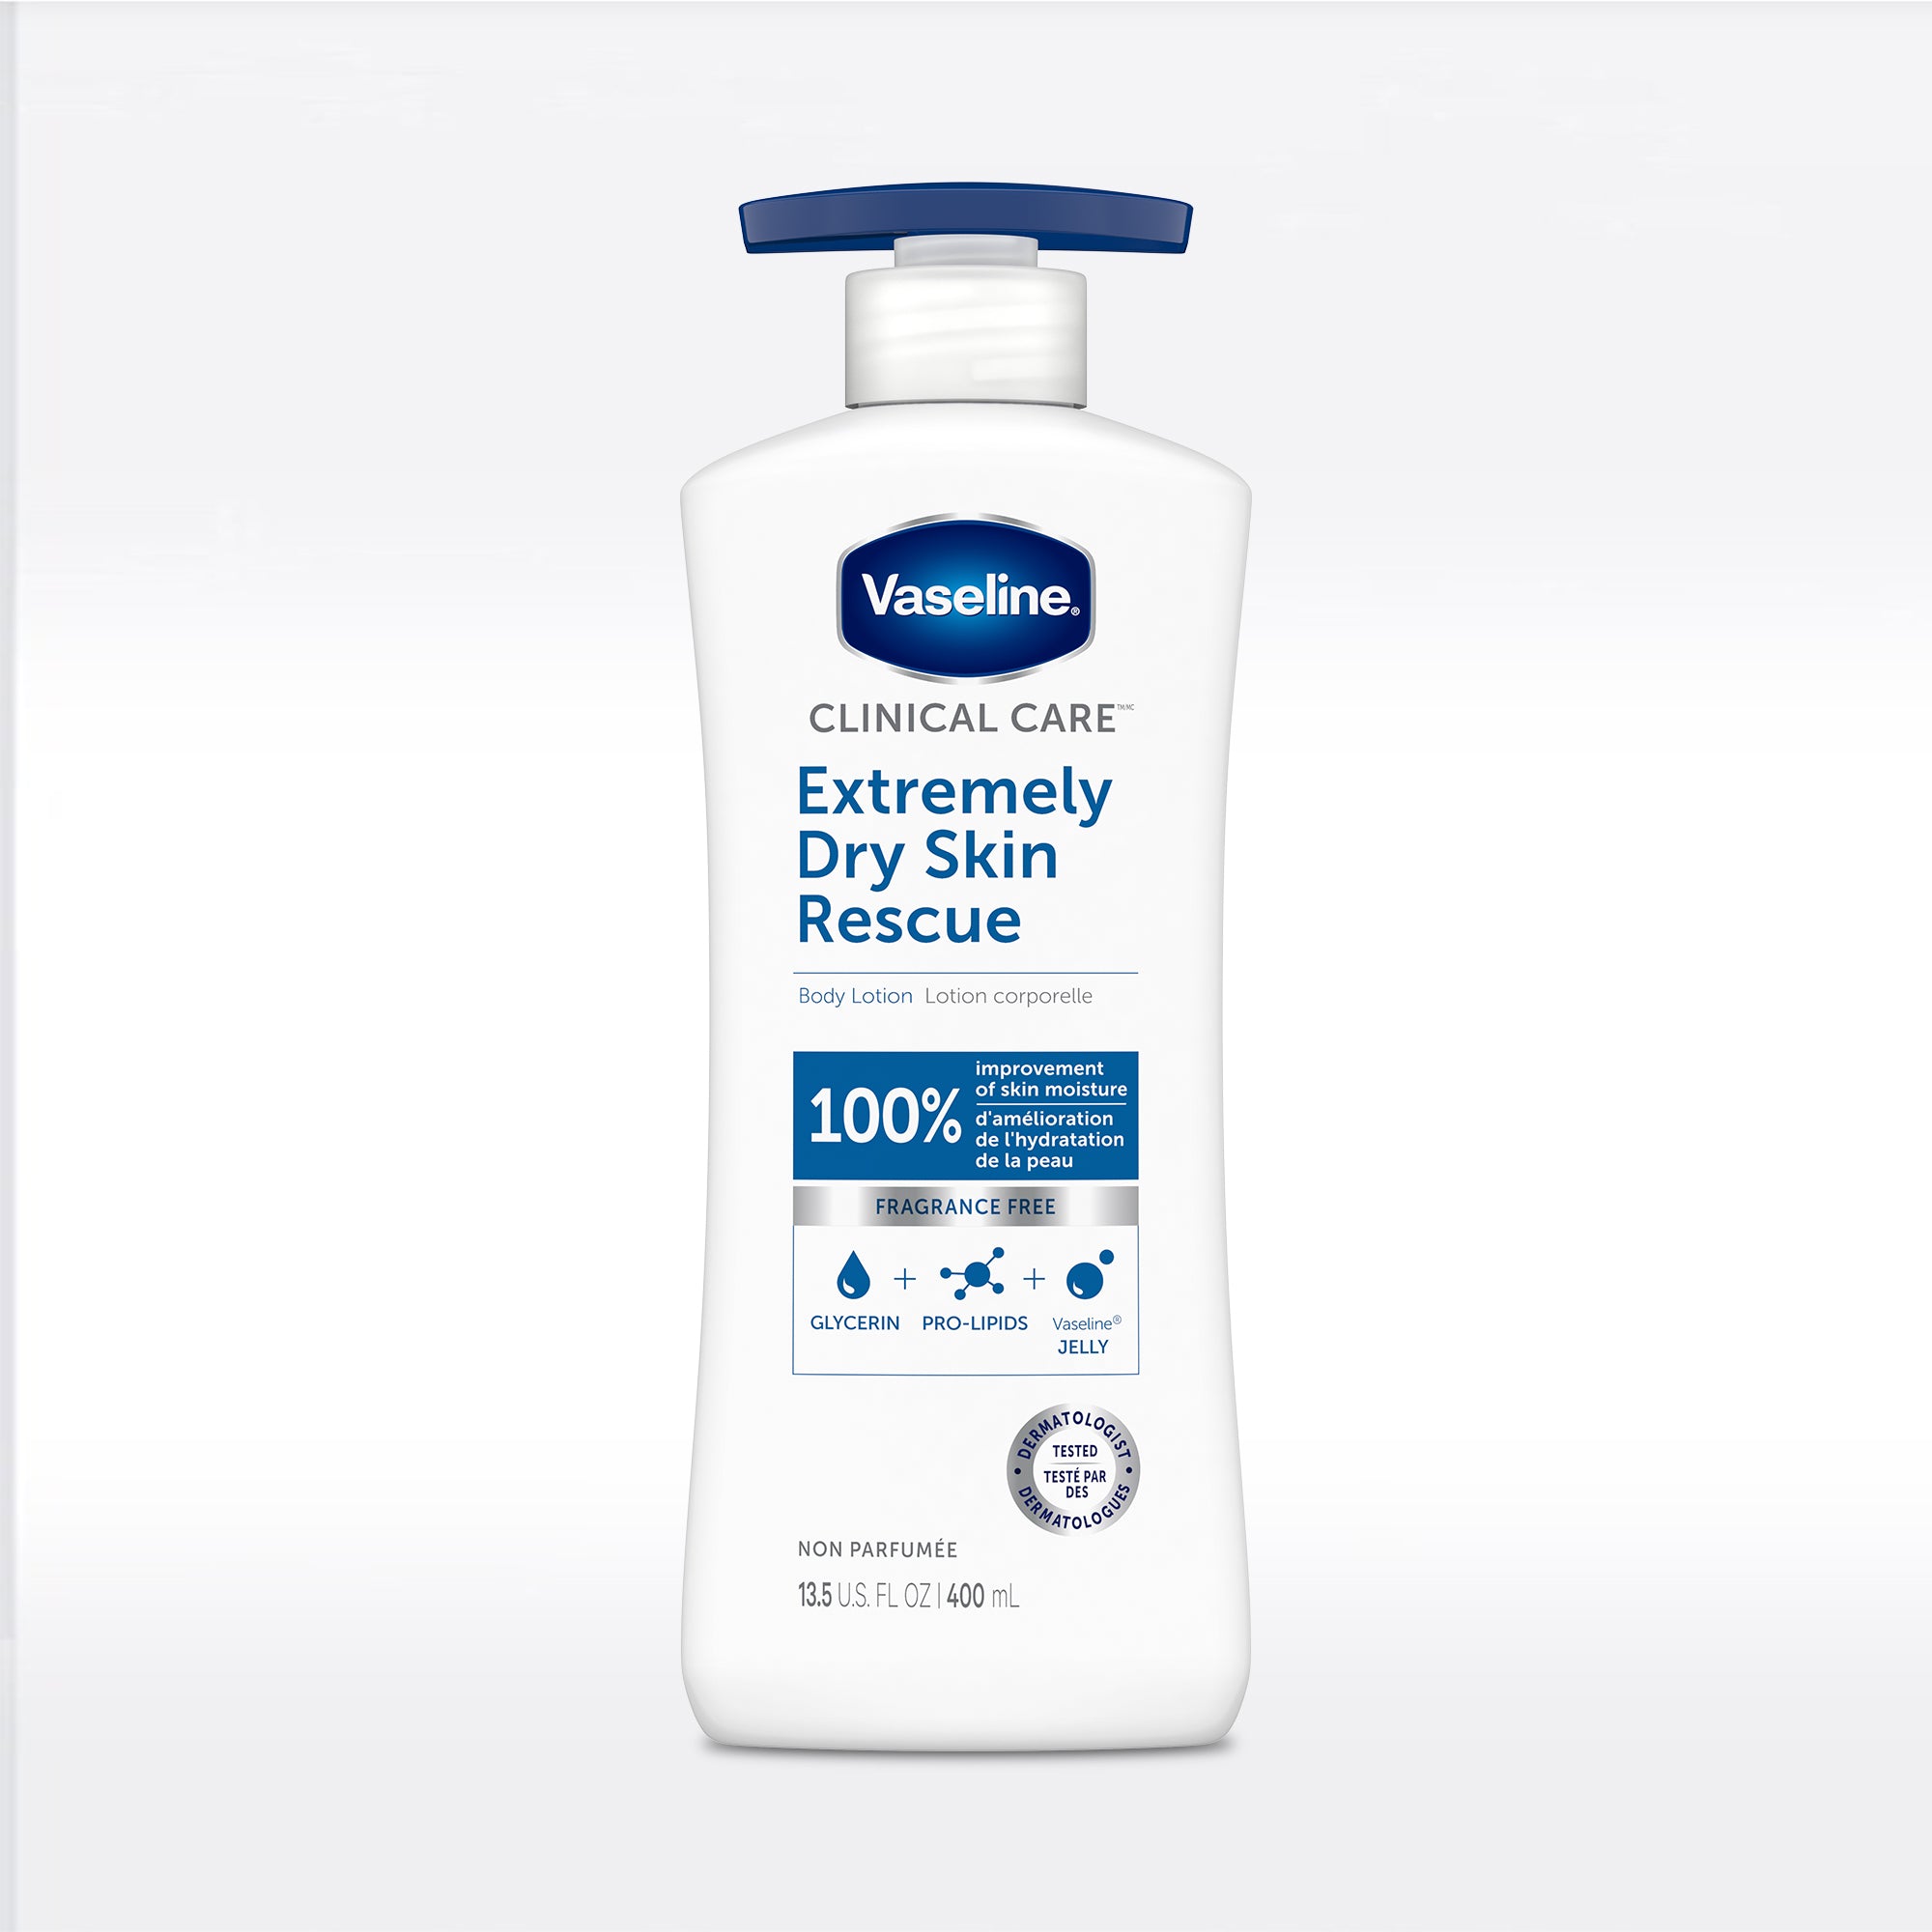 Vaseline Clinical Care Extremely Dry Skin Rescue Lotion 400mL